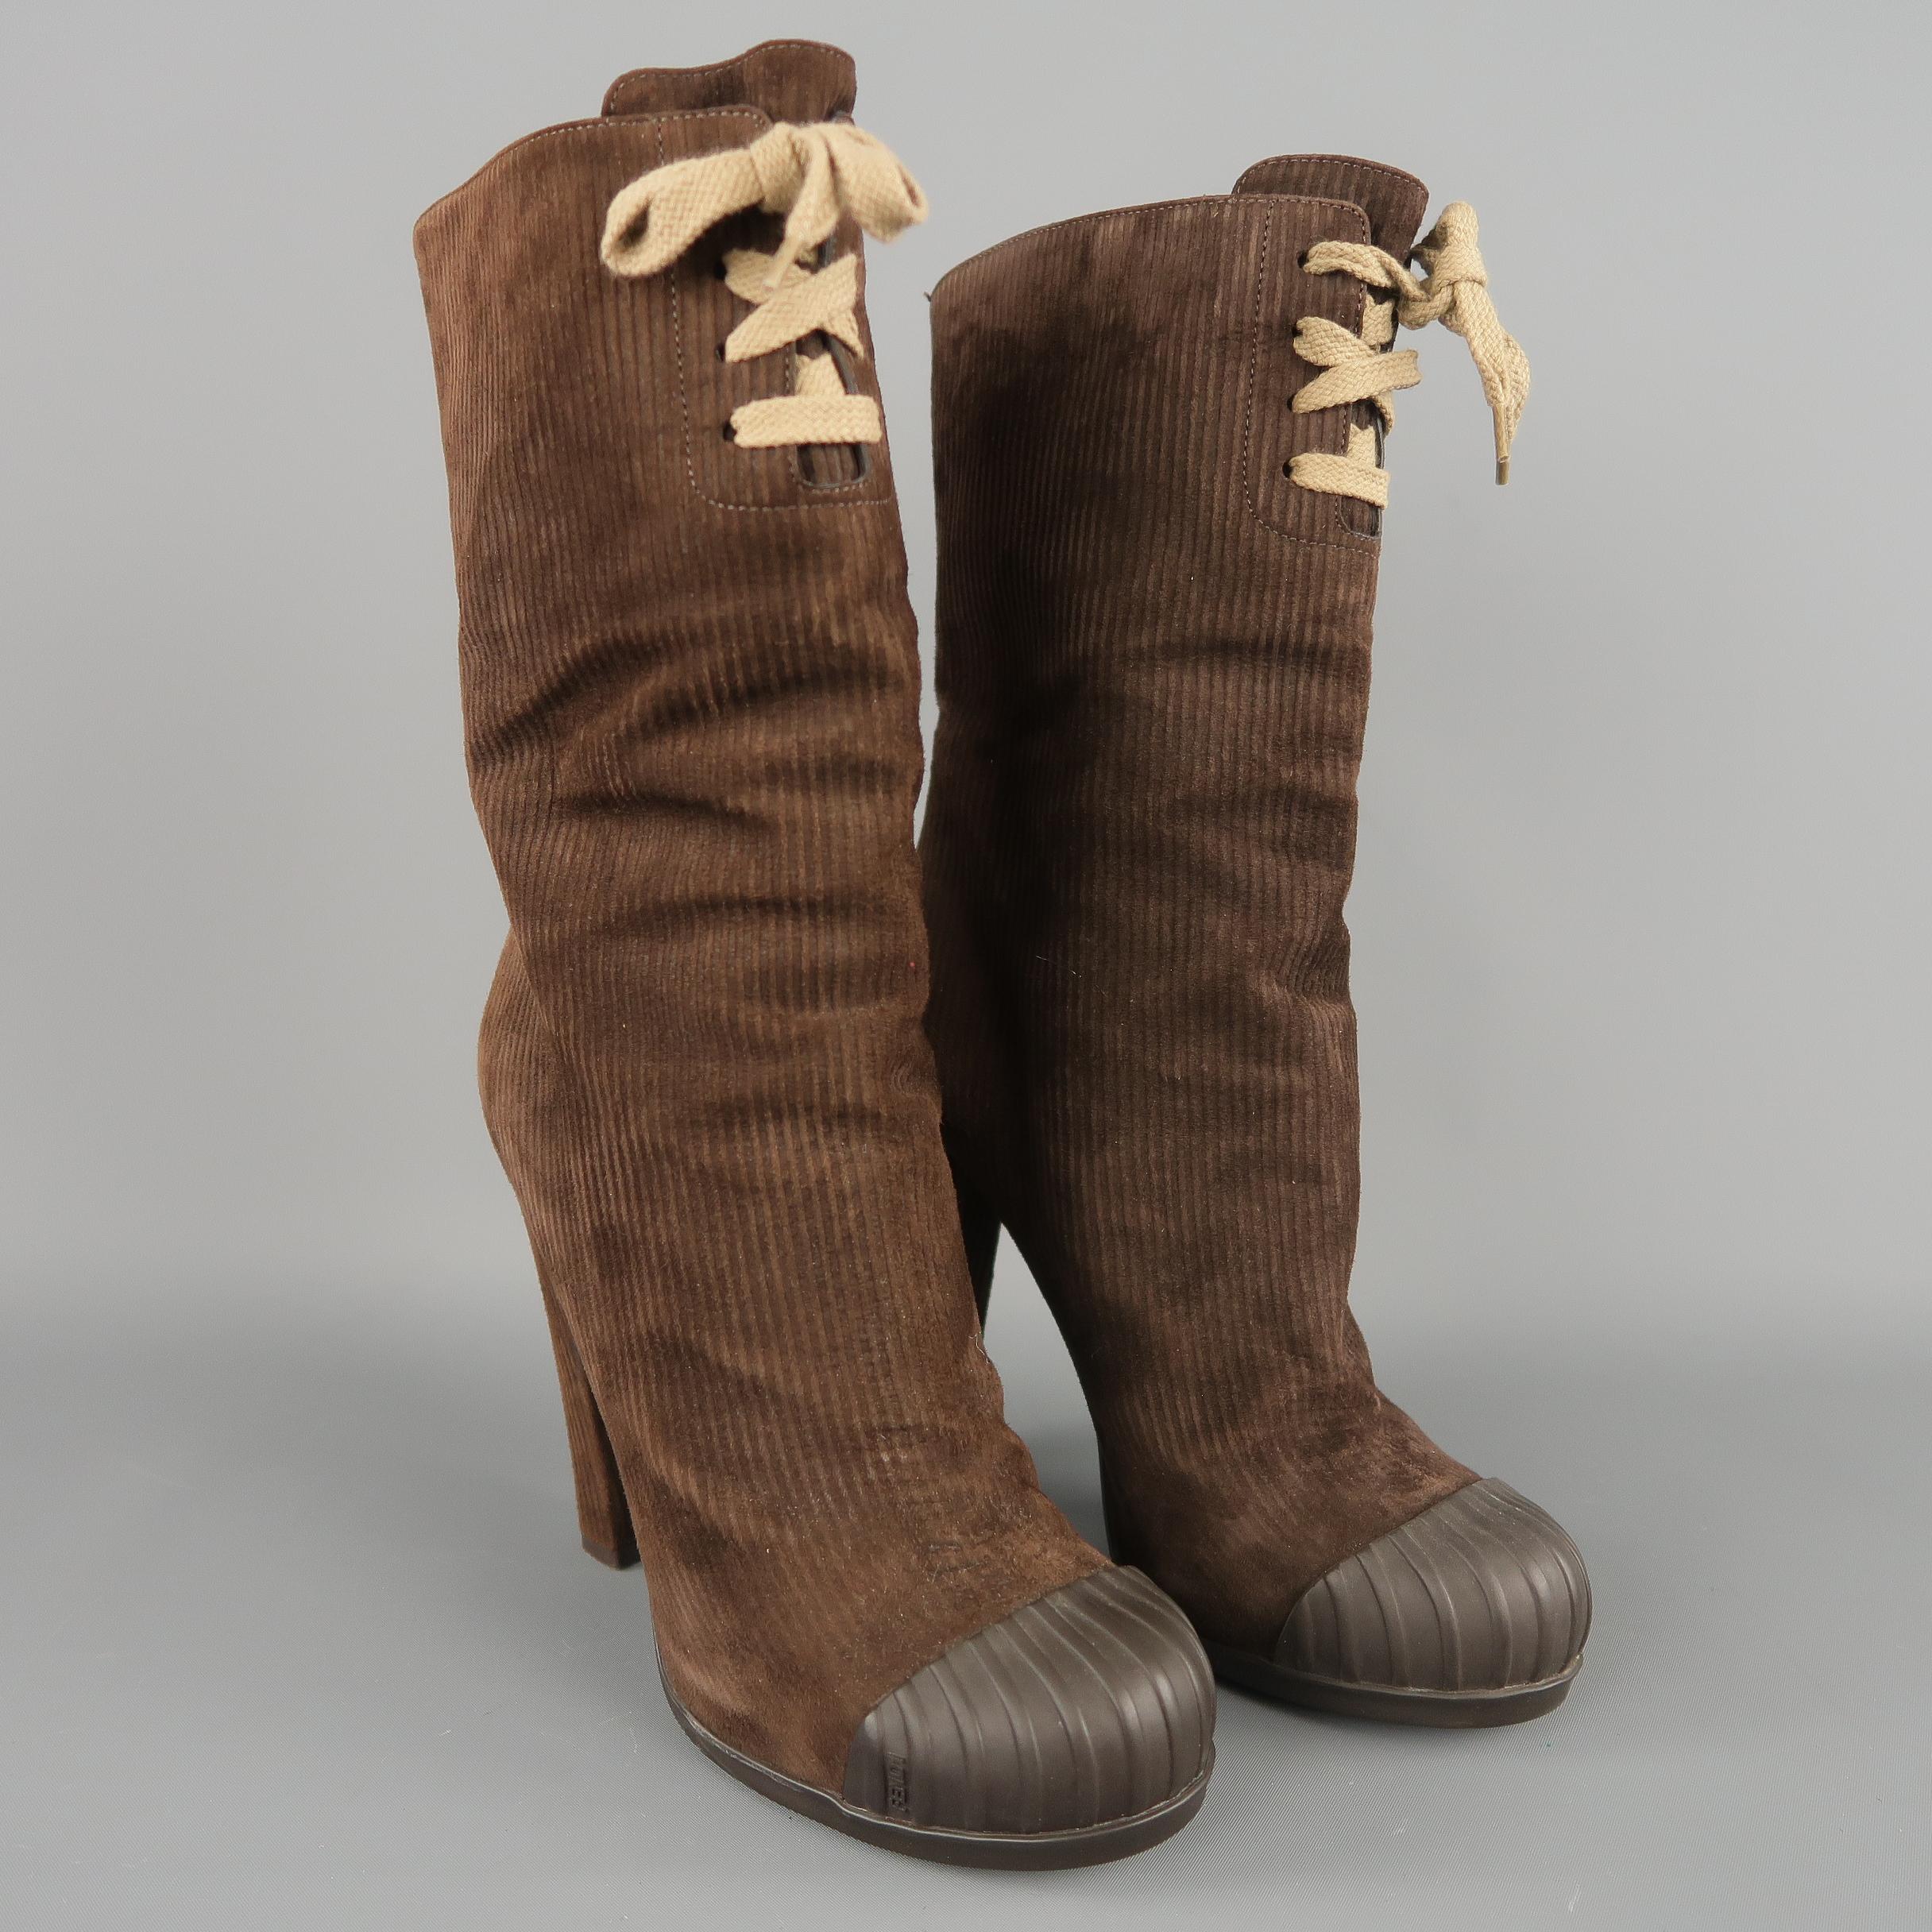 FENDI boots come in corduroy textured suede with a round rubber toe cap, covered chunky heel, and mid calf shaft with tie detail. With box. Made in Italy. Retail price $ 900,00.

 
Good Pre-Owned Condition.
Marked: IT 39
 
Measurements:
 
Heel: 4.75